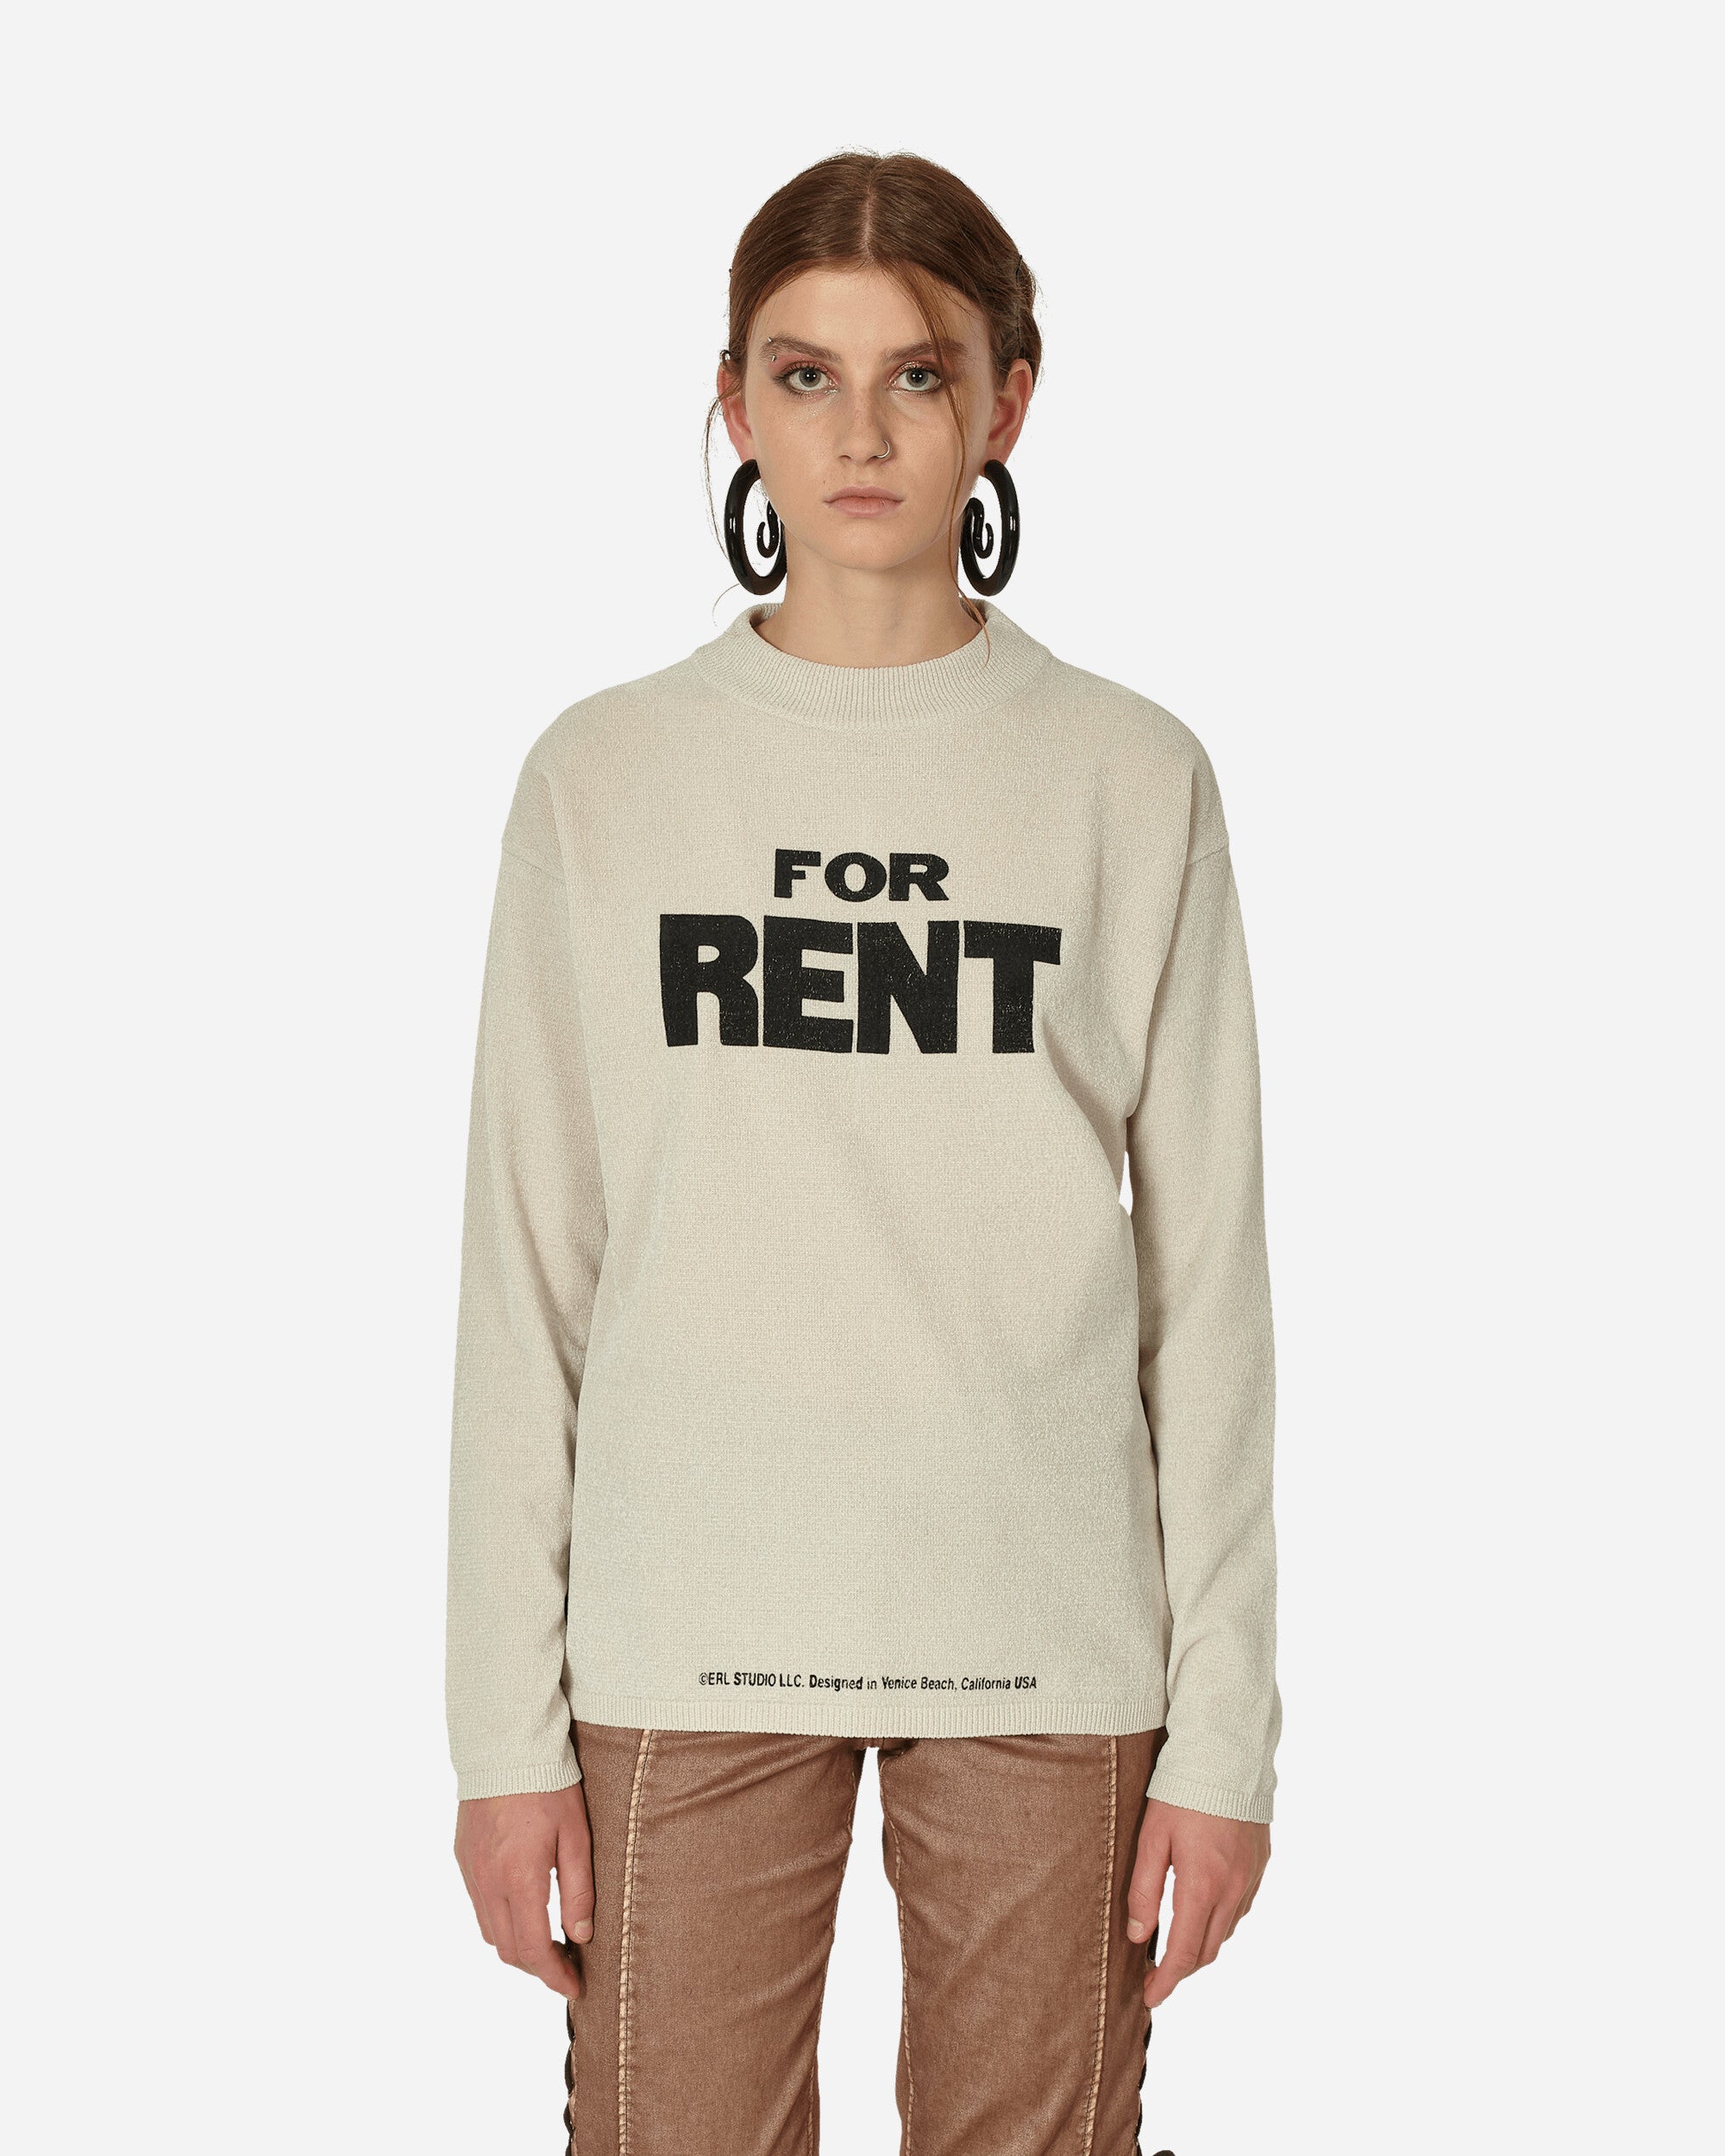 For Rent Sweater White